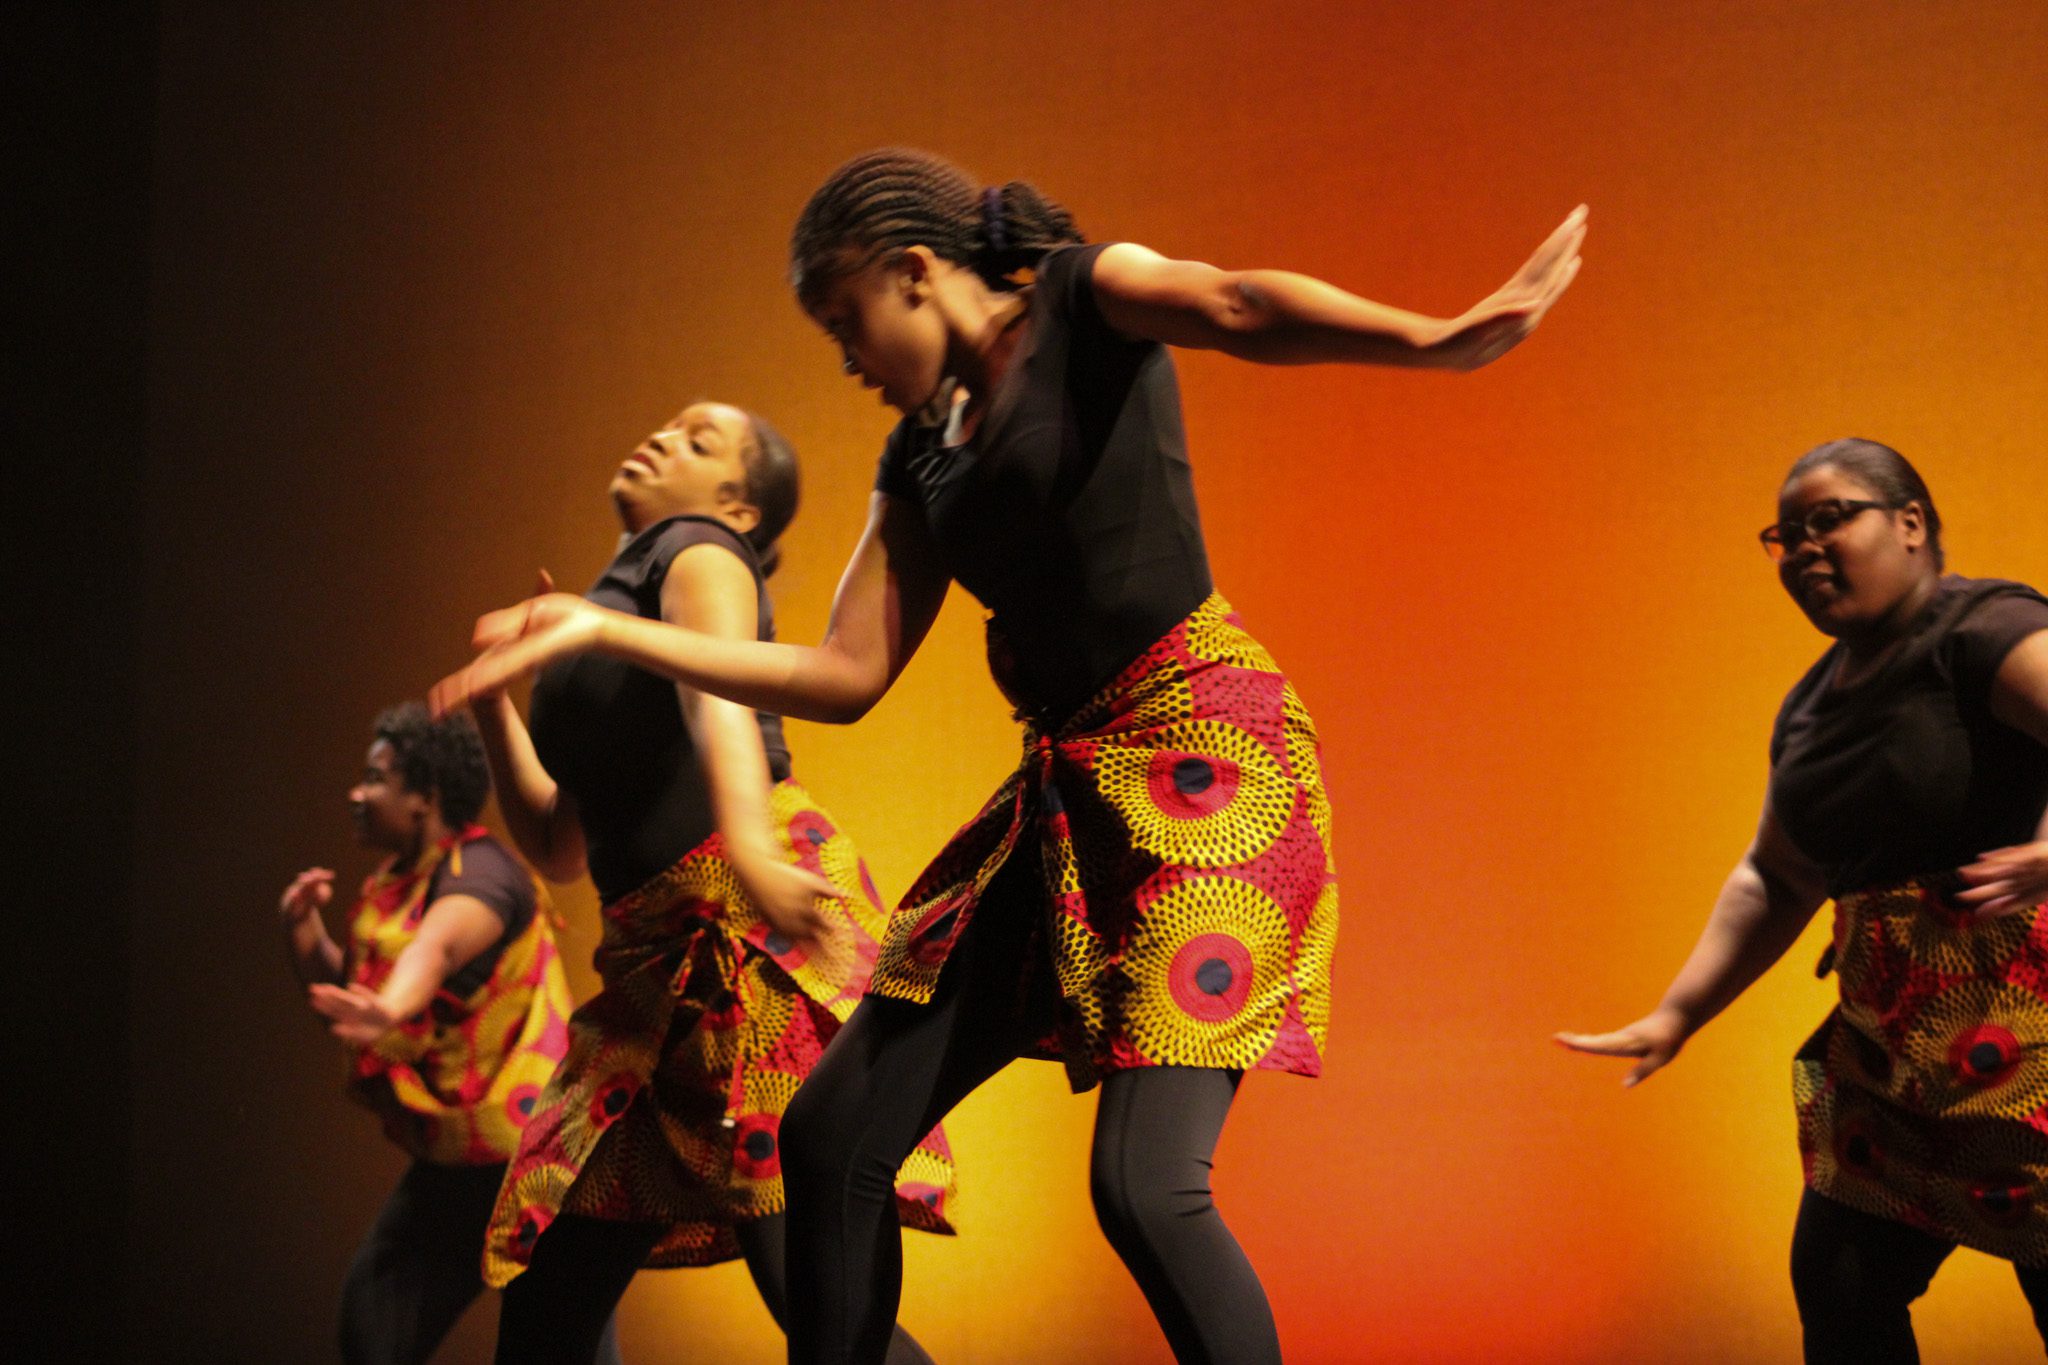 Four dancers are visible. The dancers are all wearing the yellow-orange circular patterned skirts. The dancers are all doing their dance moves as part of the routine. The background transitions into a black to orange shade.